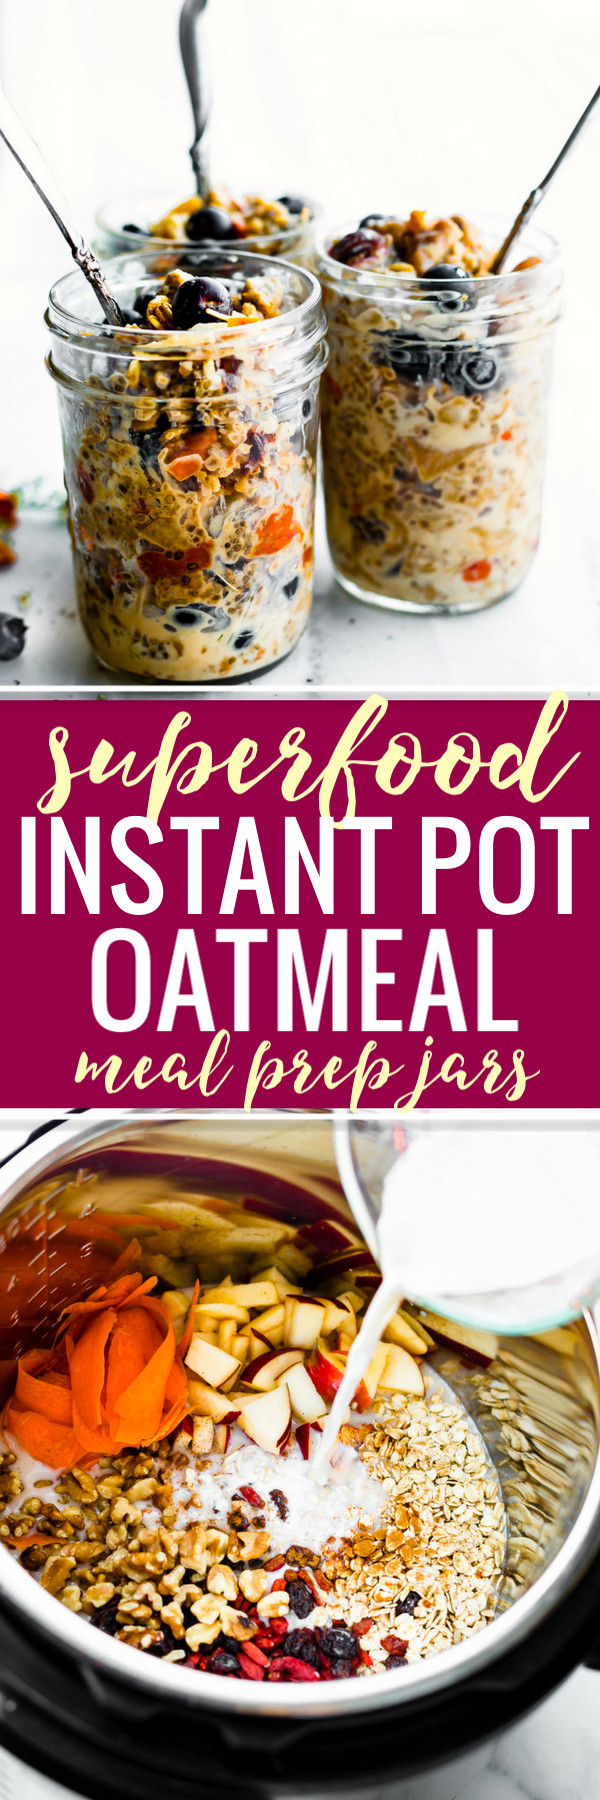 Instant Pot Oatmeal Recipes
 Superfood Instant Pot Oatmeal in a Jar Meal Prep Recipe